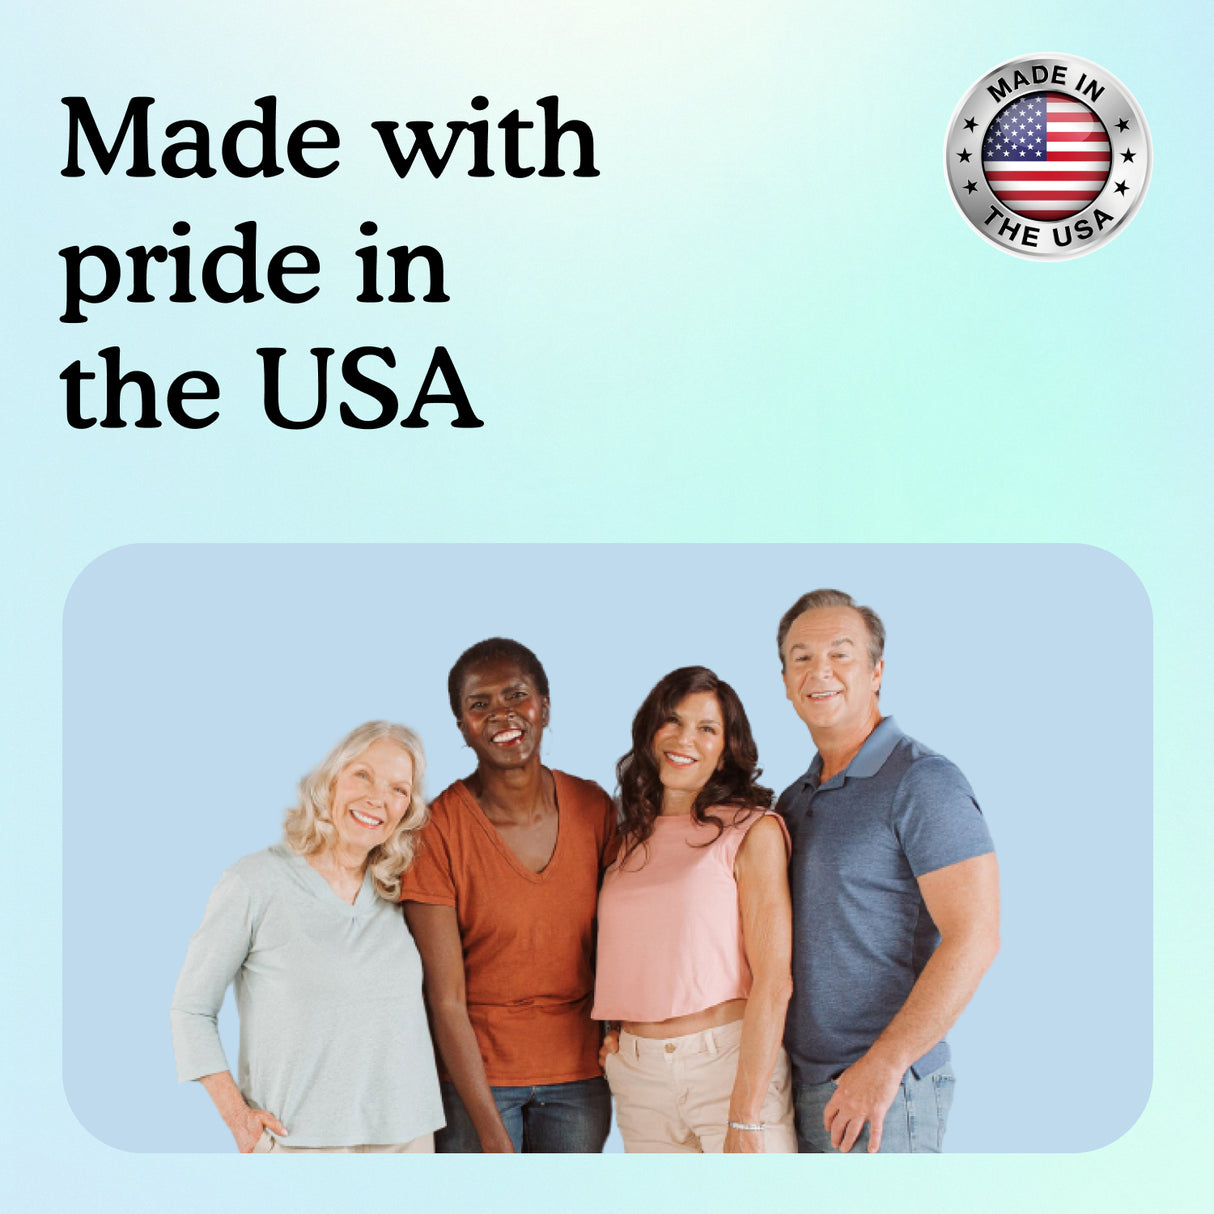 Made with pride in the USA.